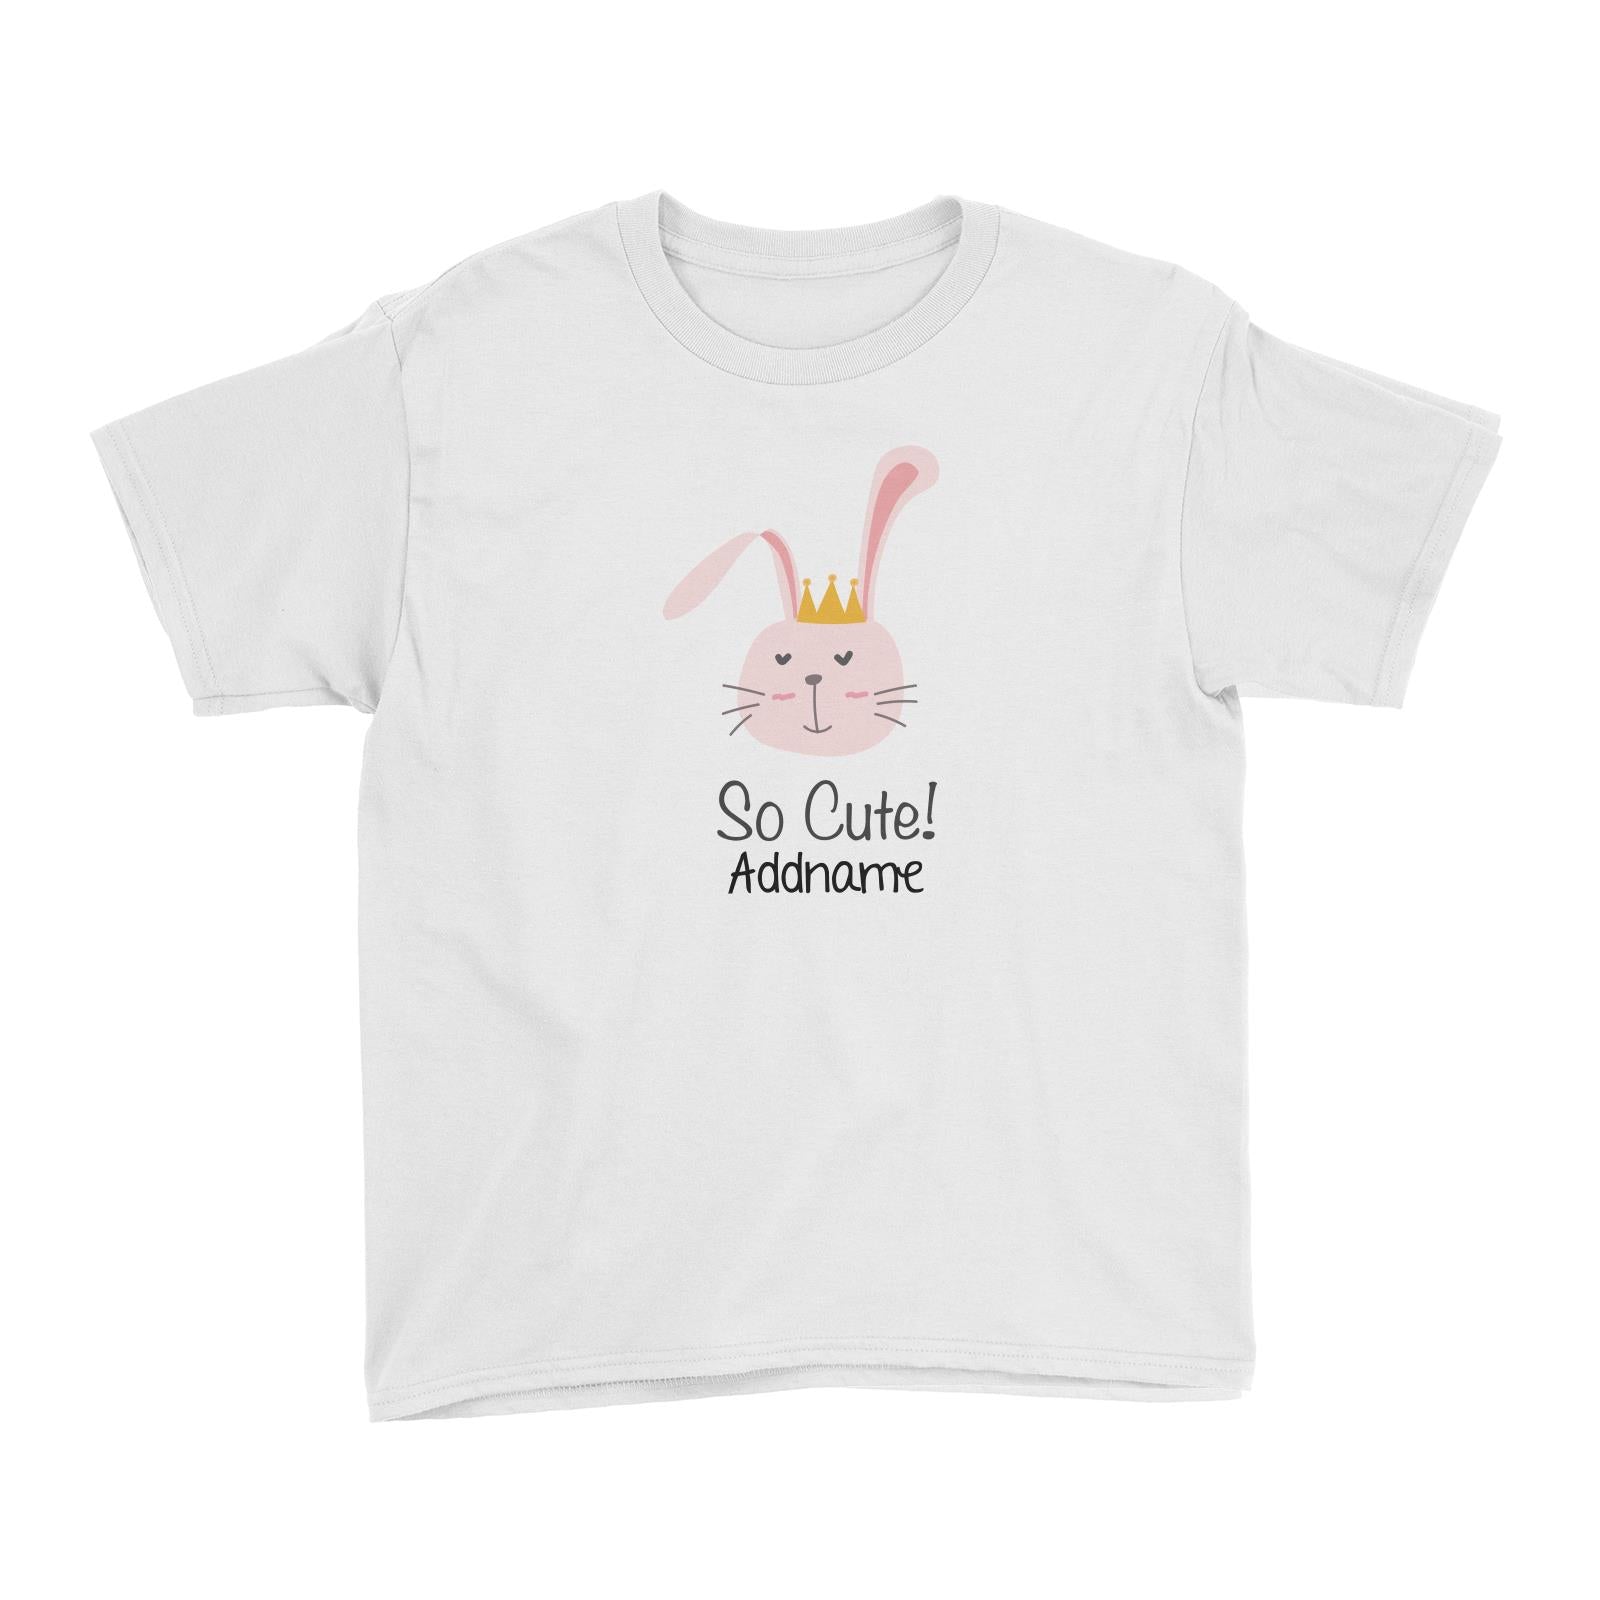 Cute Animals And Friends Series Cute Love Bunny With Crown Addname Kid's T-Shirt